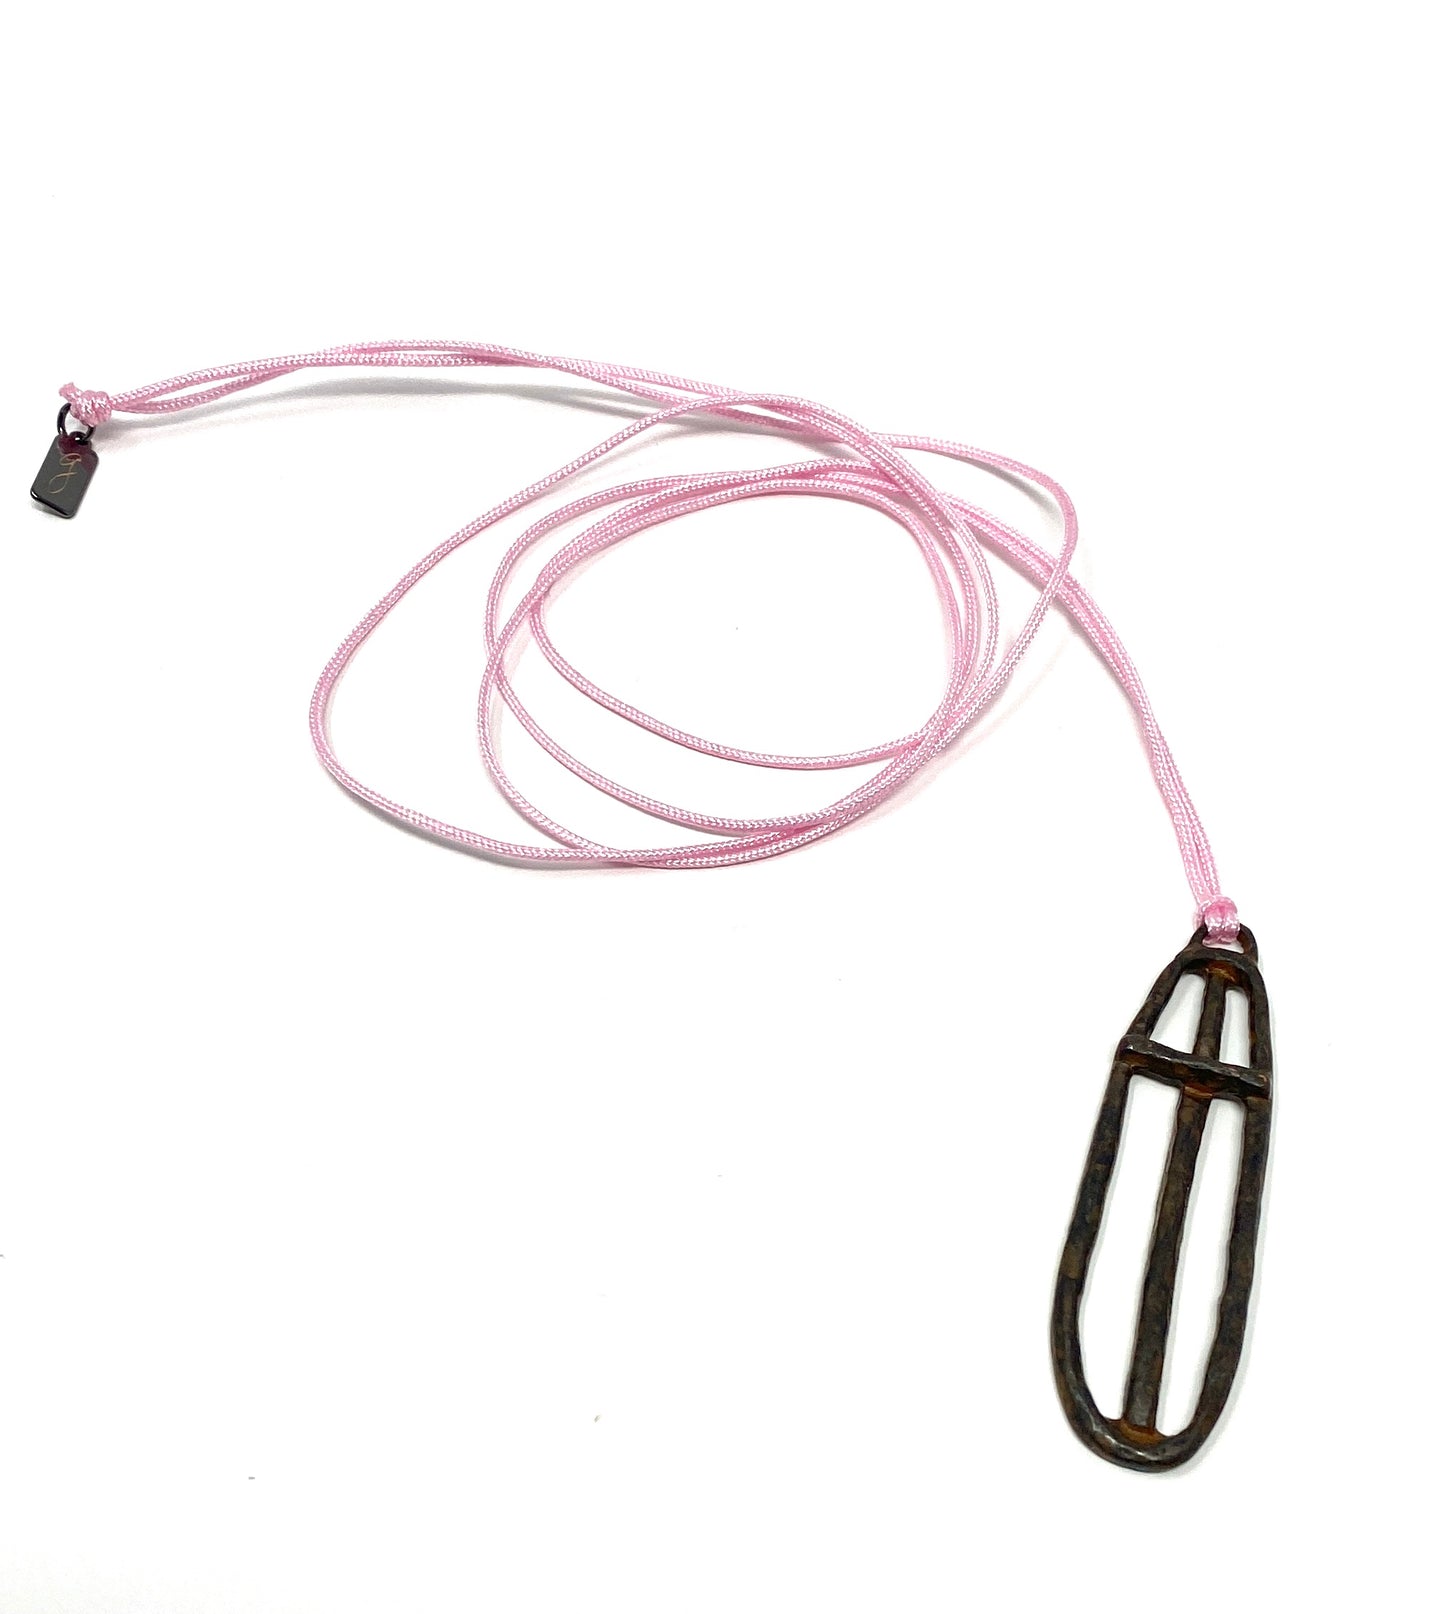 Light Pink Nylon Cord Necklace With Rustic Cross Pendant